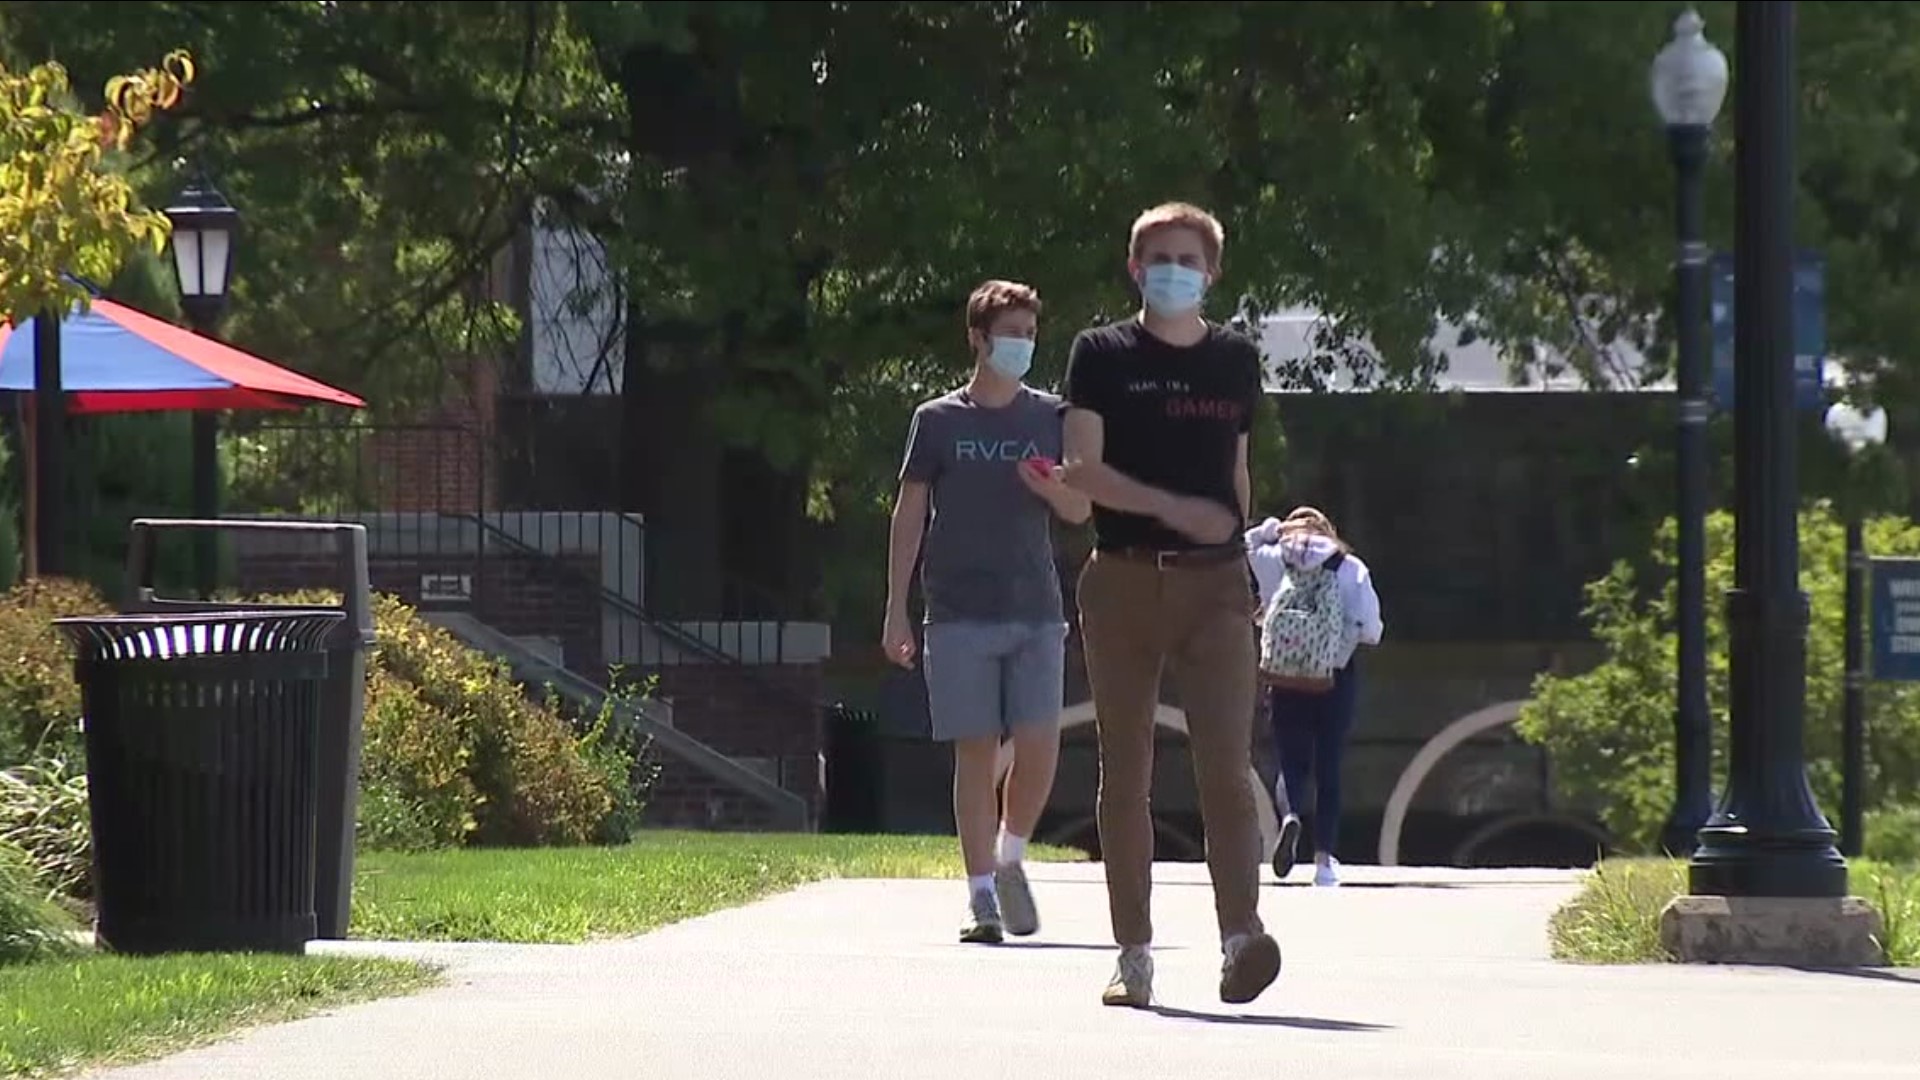 Masks are back at Bucknell University after the CDC classified Union County's COVID-19 transmission level as high.